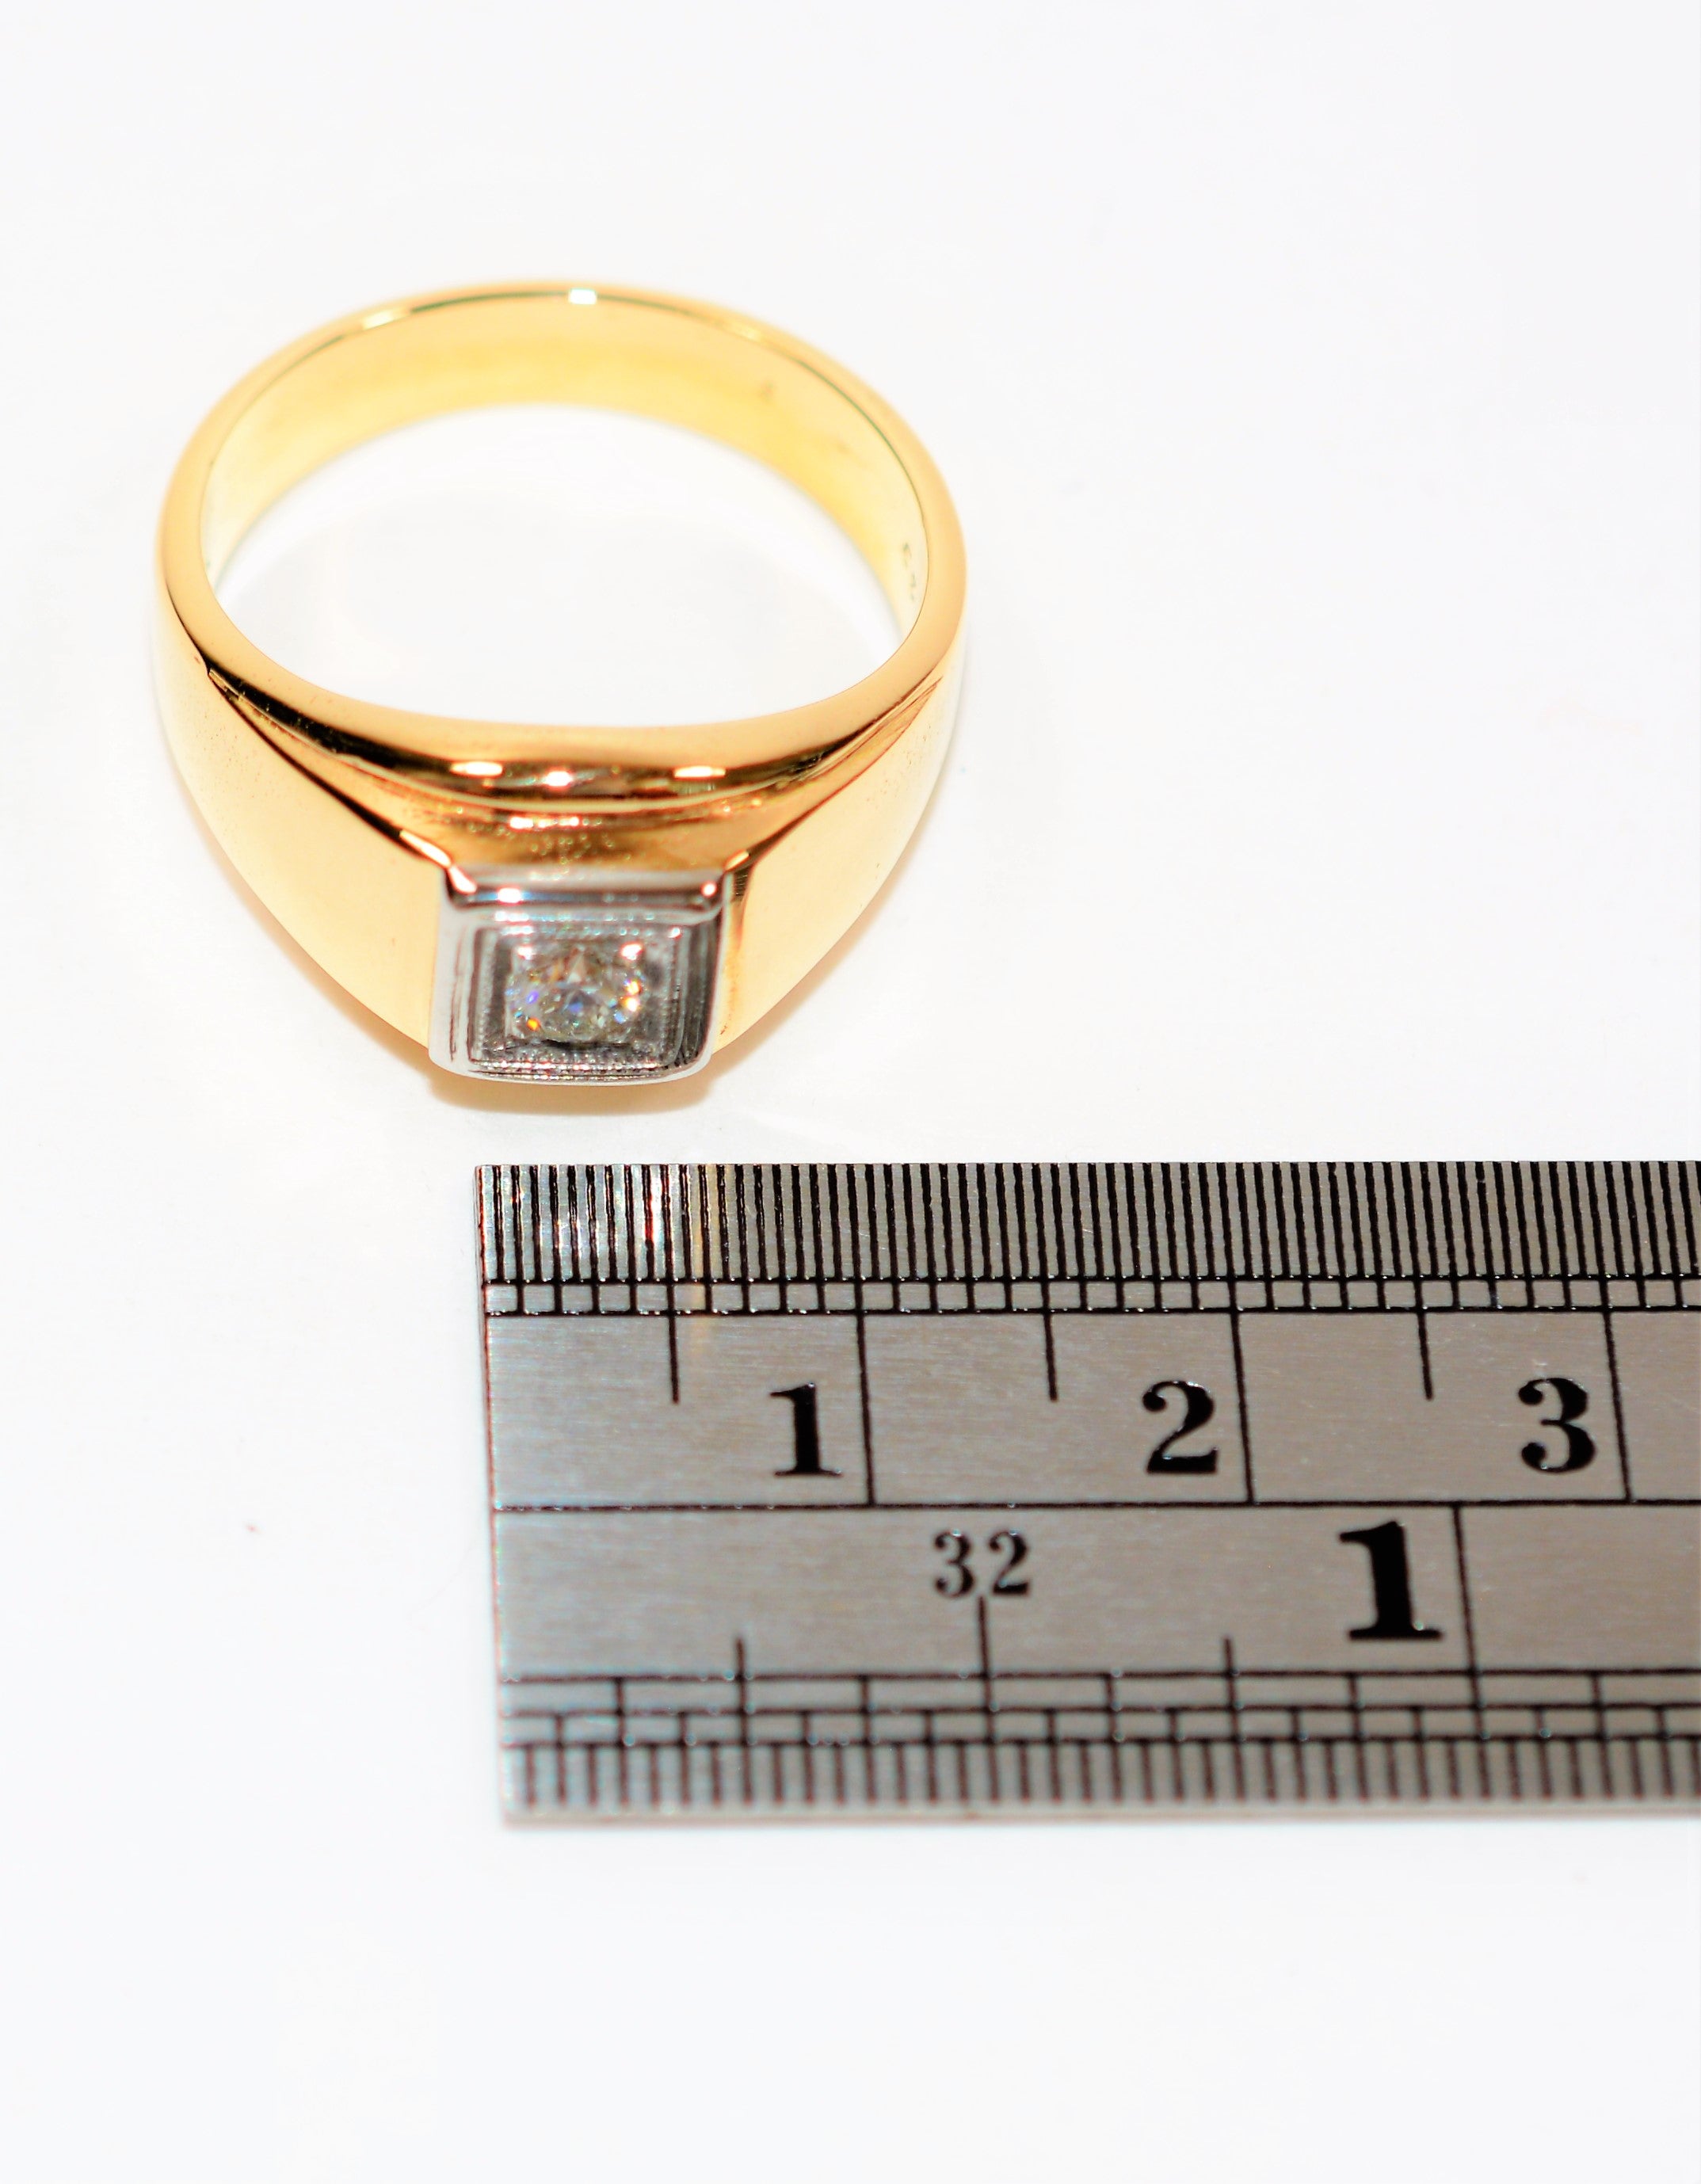 Natural Diamond Ring 14K Solid Gold .22ct Solitaire Ring Statement Ring Cocktail Ring Birthstone Ring Estate Jewelry Vintage Ring Men's Ring